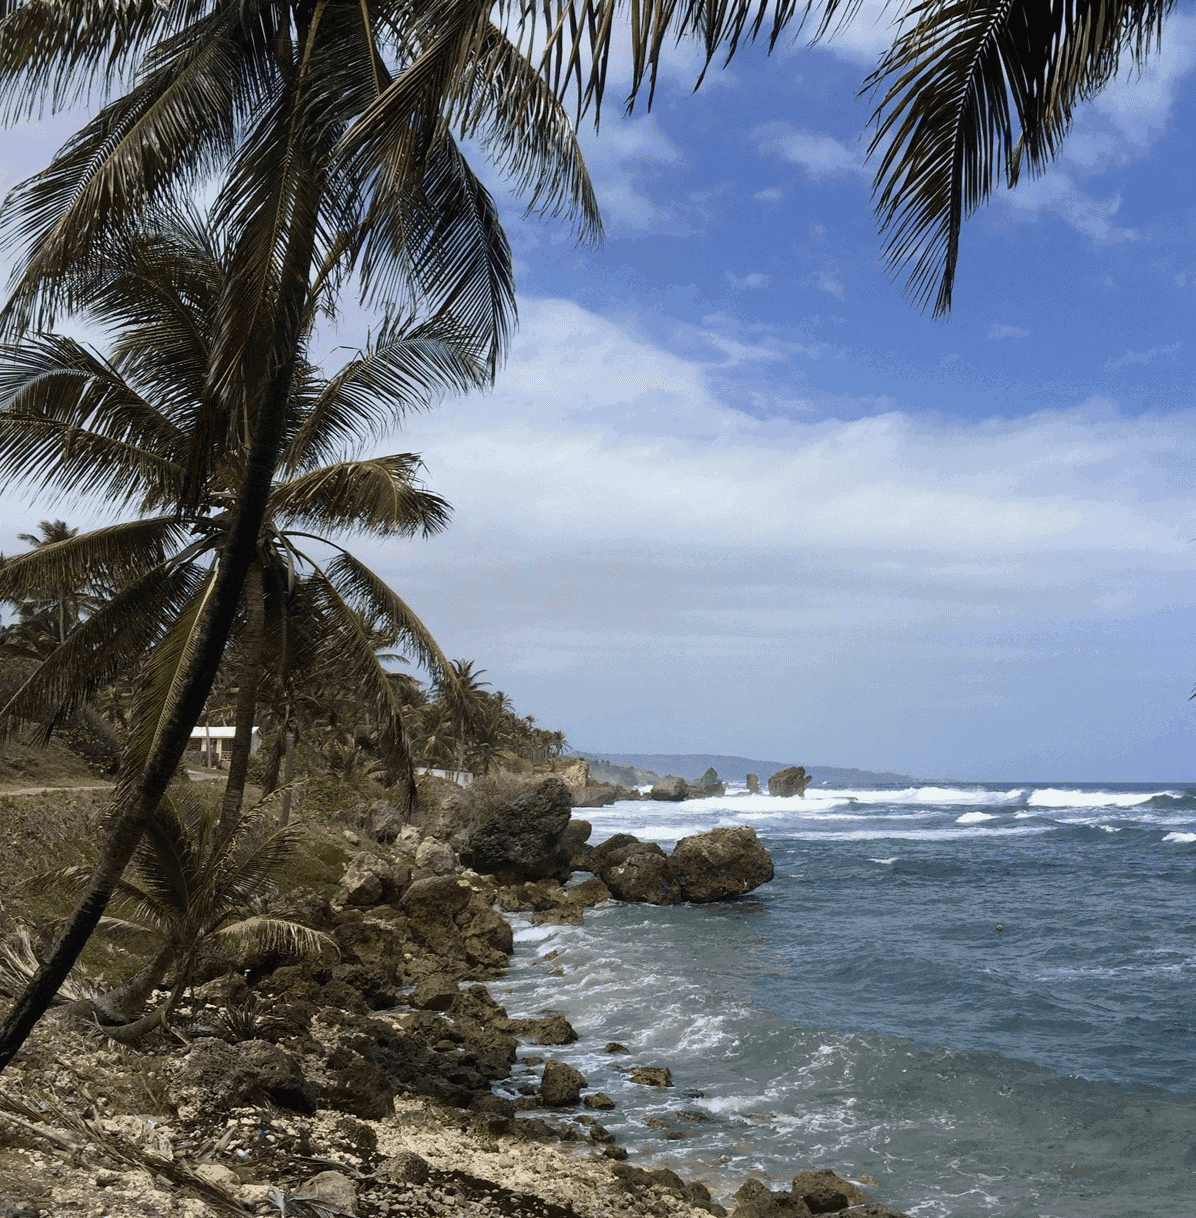 Coastline with palm trees and rocks in Barbados